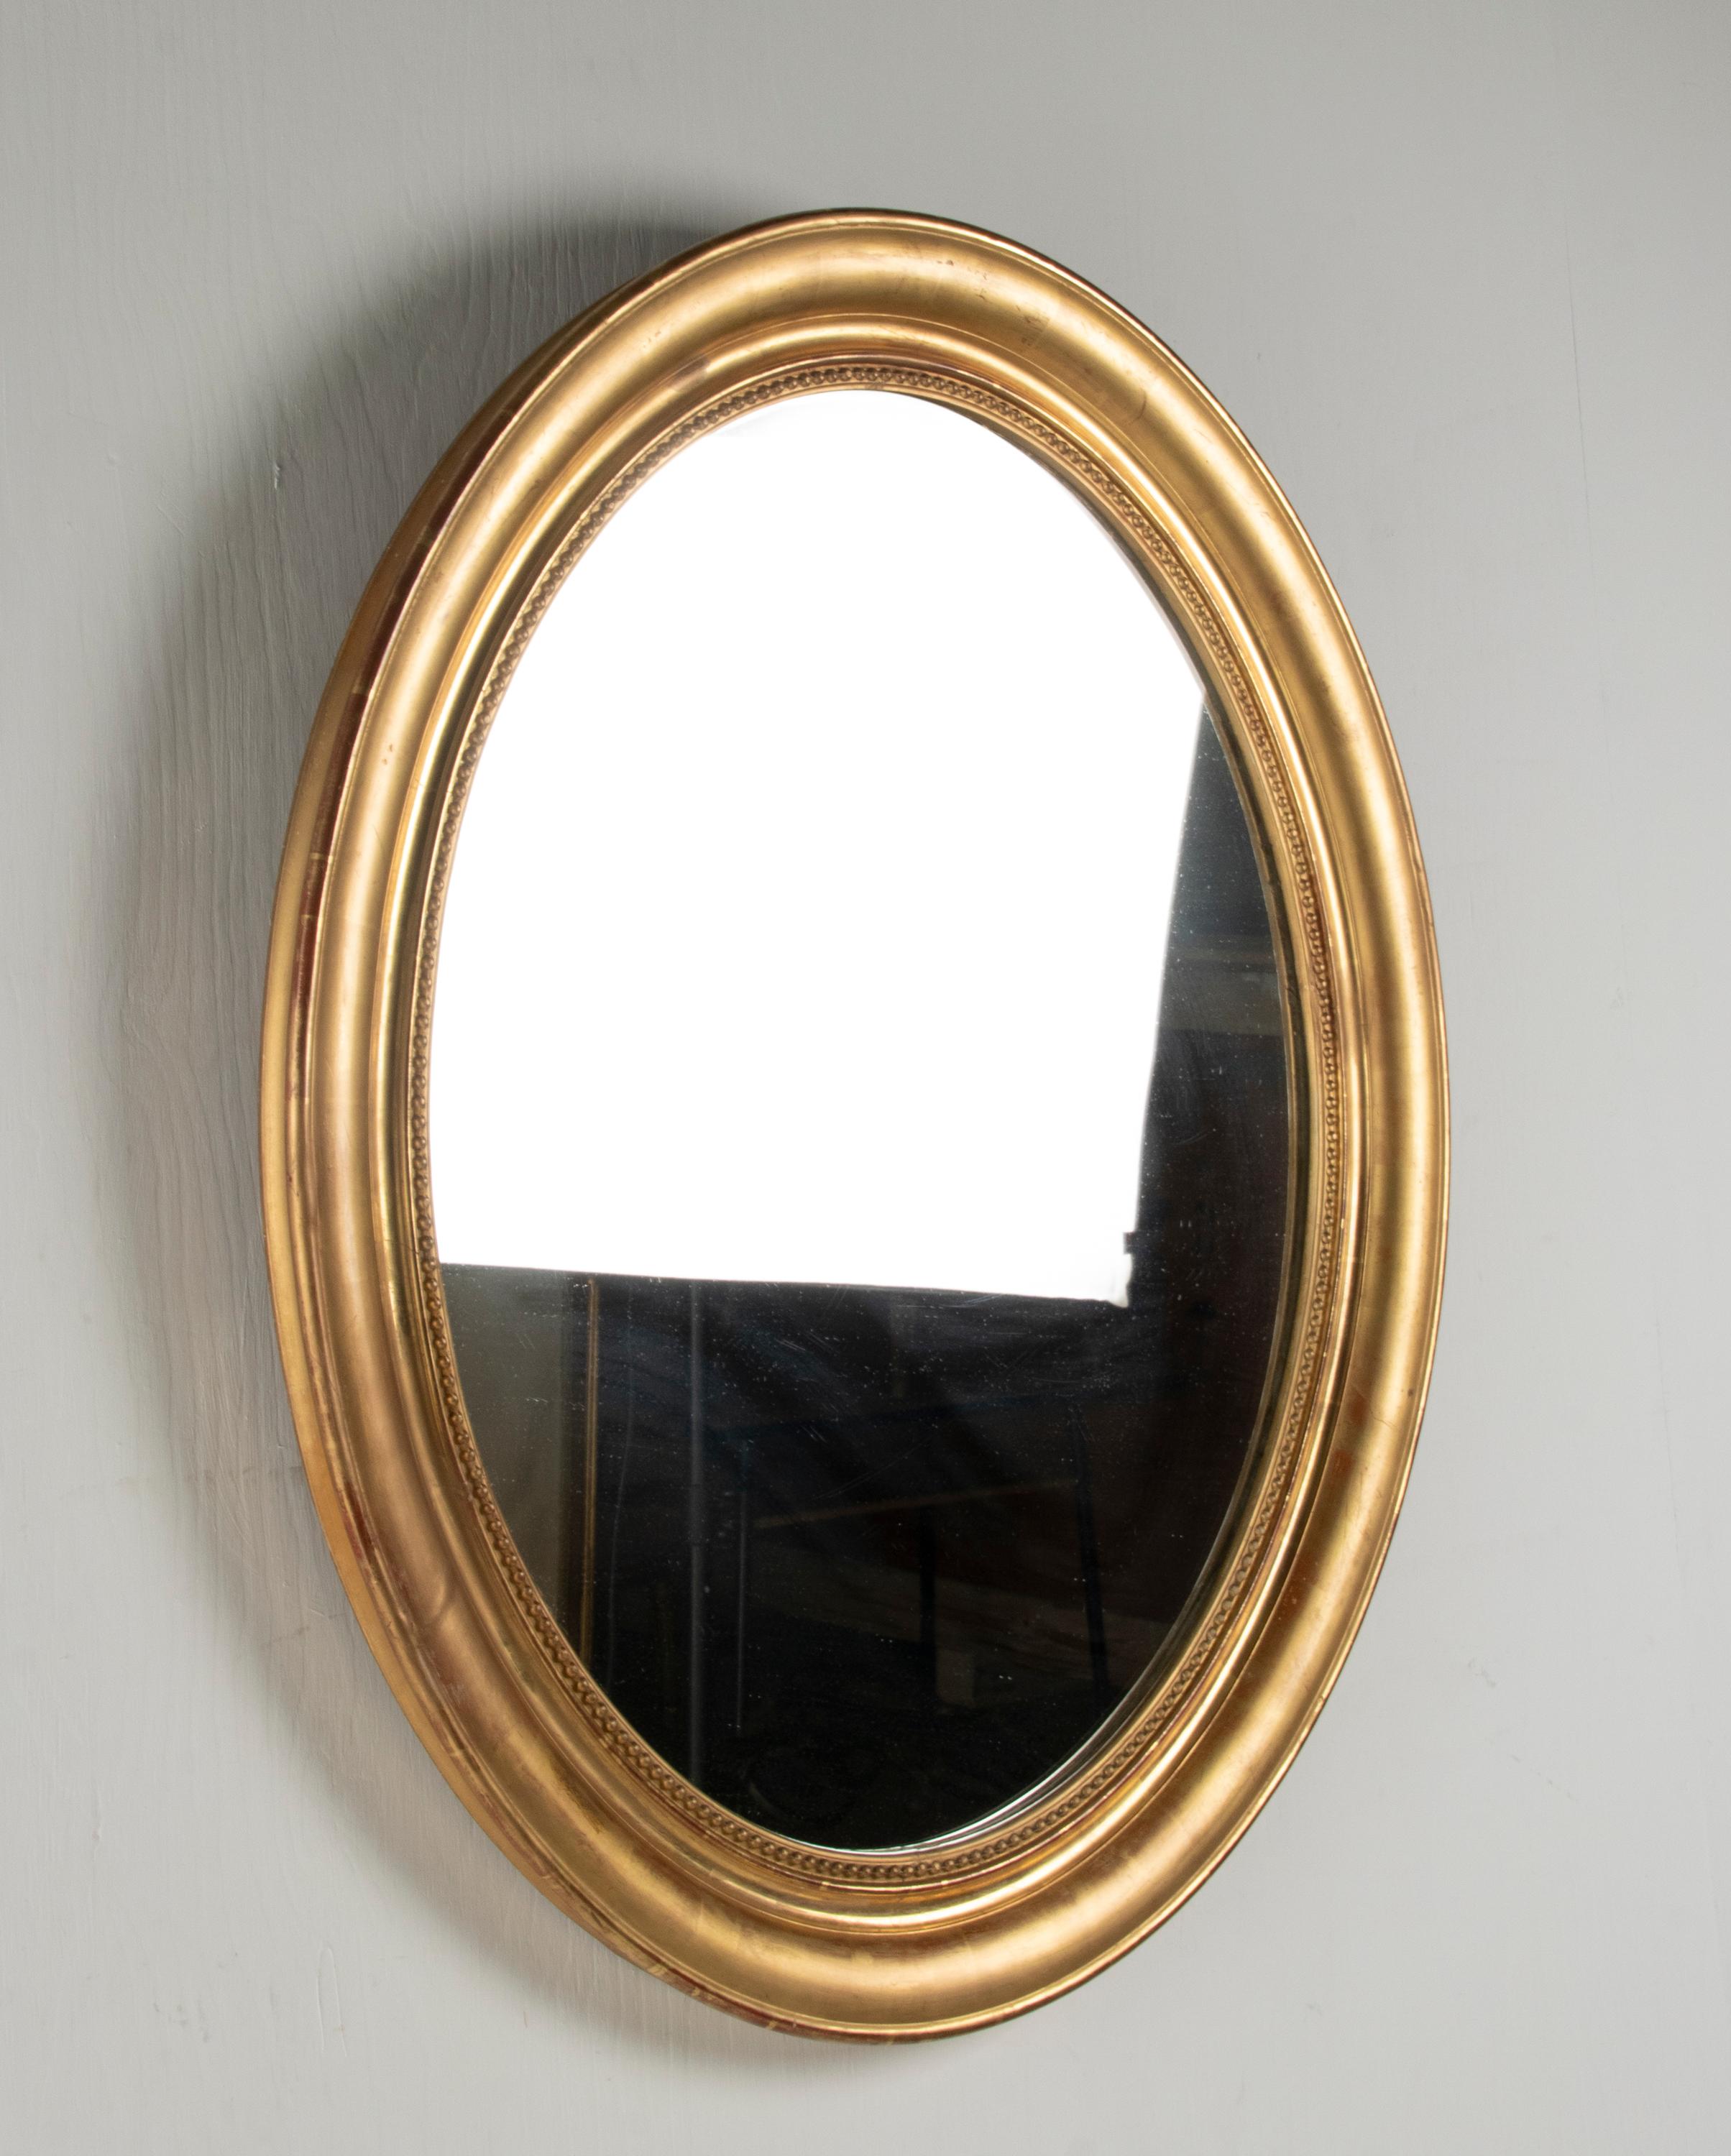 An antique French oval wall mirror, in beaded gilded frame. in Louis Philippe style, made in 1870-1880. The mirror is entirely gilded with gold leaf. The gold leaf has some wear, the underneath red bole gives a nice warm and antique patina. The